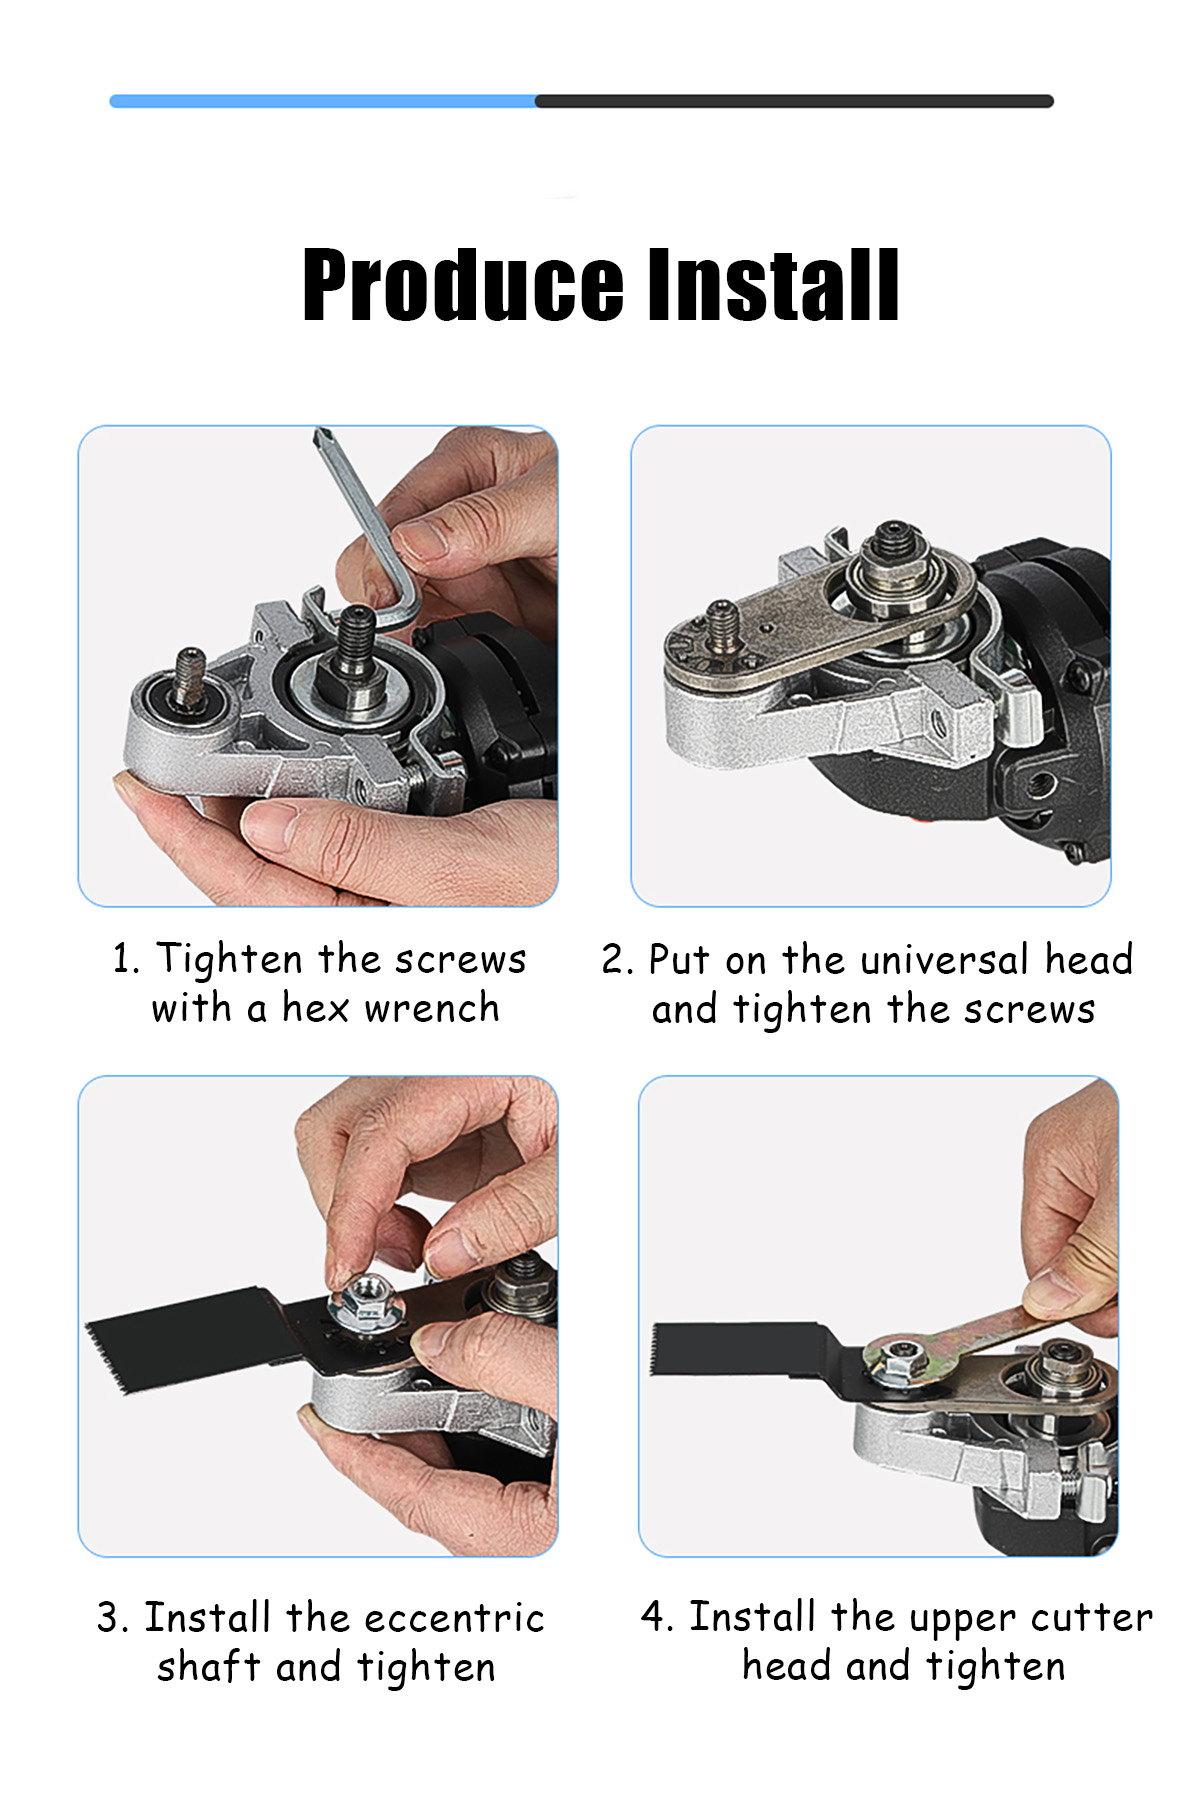 Oscillating-Multi-Saw-Attachment-Adapter-Change-Angle-Grinder-into-Trimming-Machine-Oscillating-Tool-1846644-6